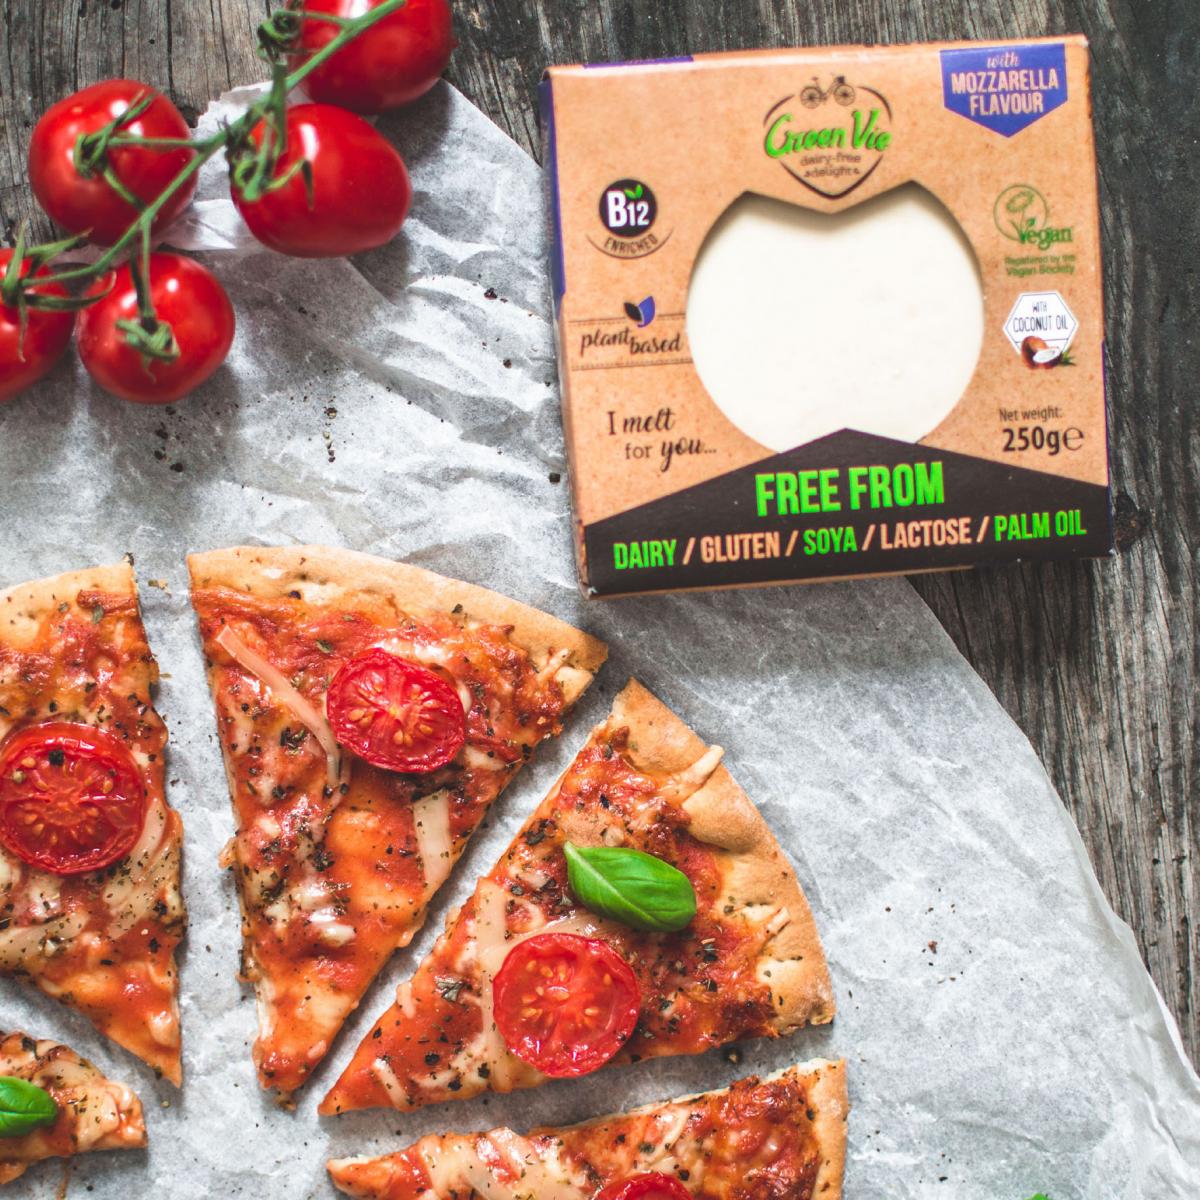 Cheese and tomato pizza cut up next to Green Vie cheese in packaging